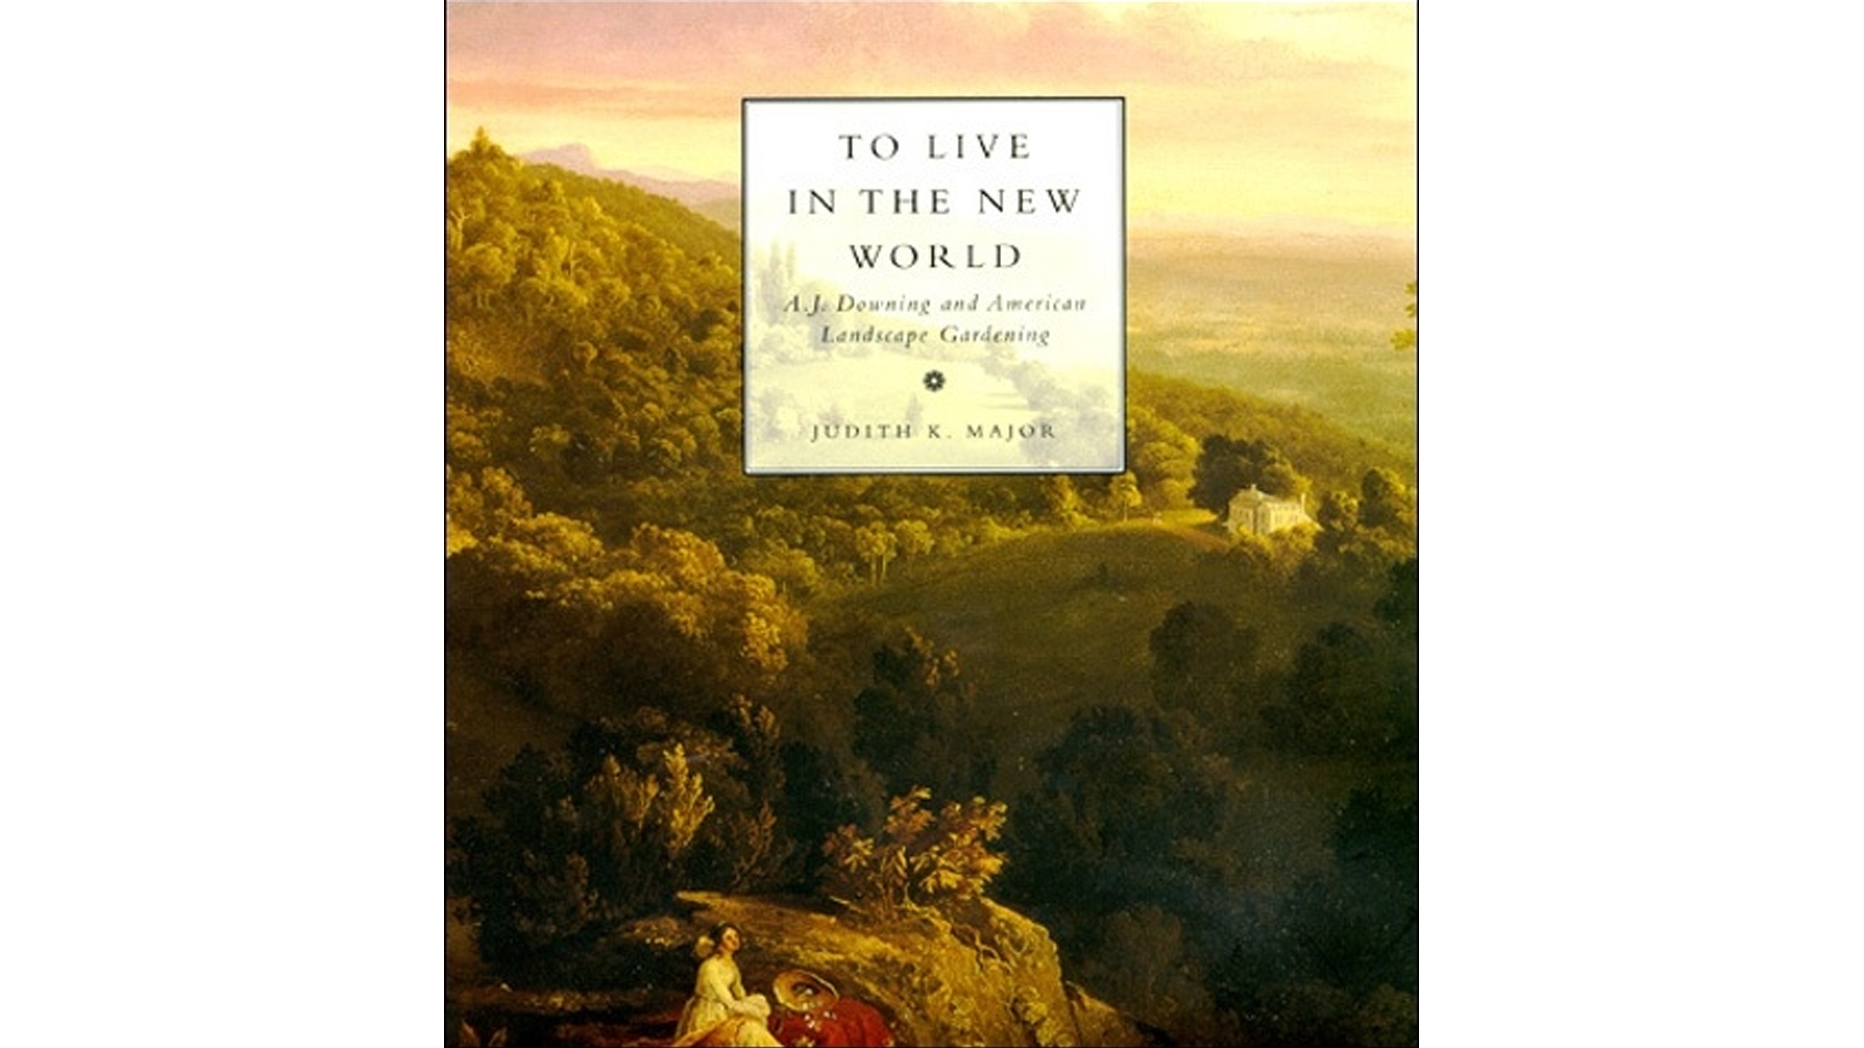 To live in the New World book cover